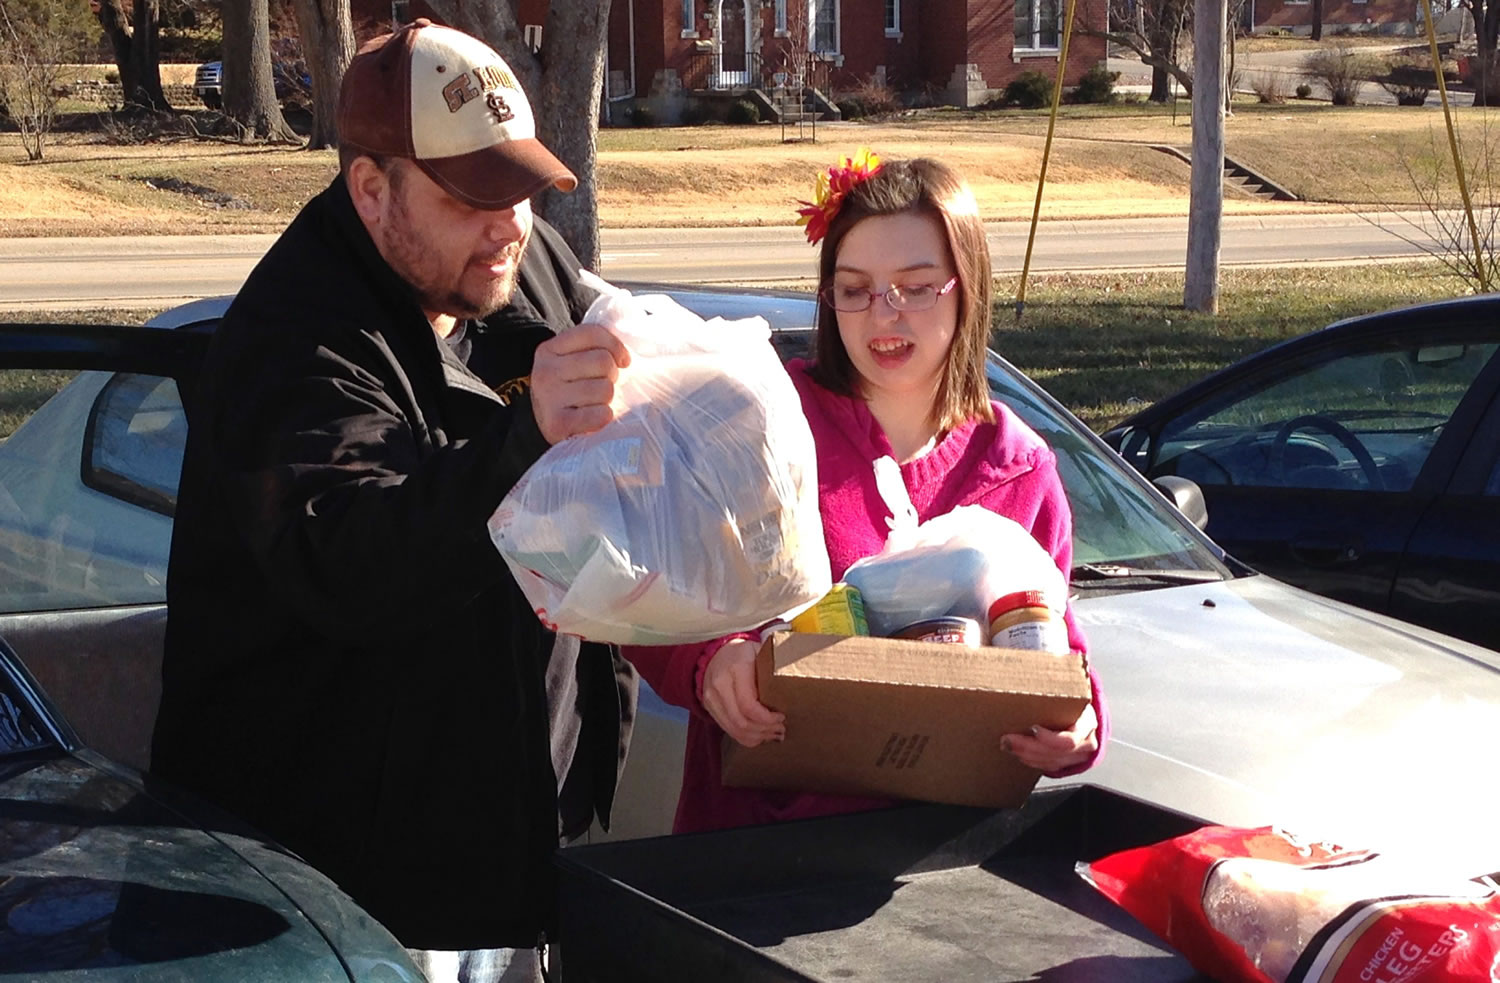 In this Jan. 28, 2016 photo, Joe Heflin, left, of Jefferson City, loads free groceries into the backseat of his car with the help from a volunteer at the Samaritan Center food pantry in Jefferson City, Mo.  Heflin, 33, also receives federally funded food stamp benefits. He is among the more than 1 million people nationwide whose food stamps could end in three months if he doesnt meet work requirements or receive a disability exemption. (AP Photo/David A.